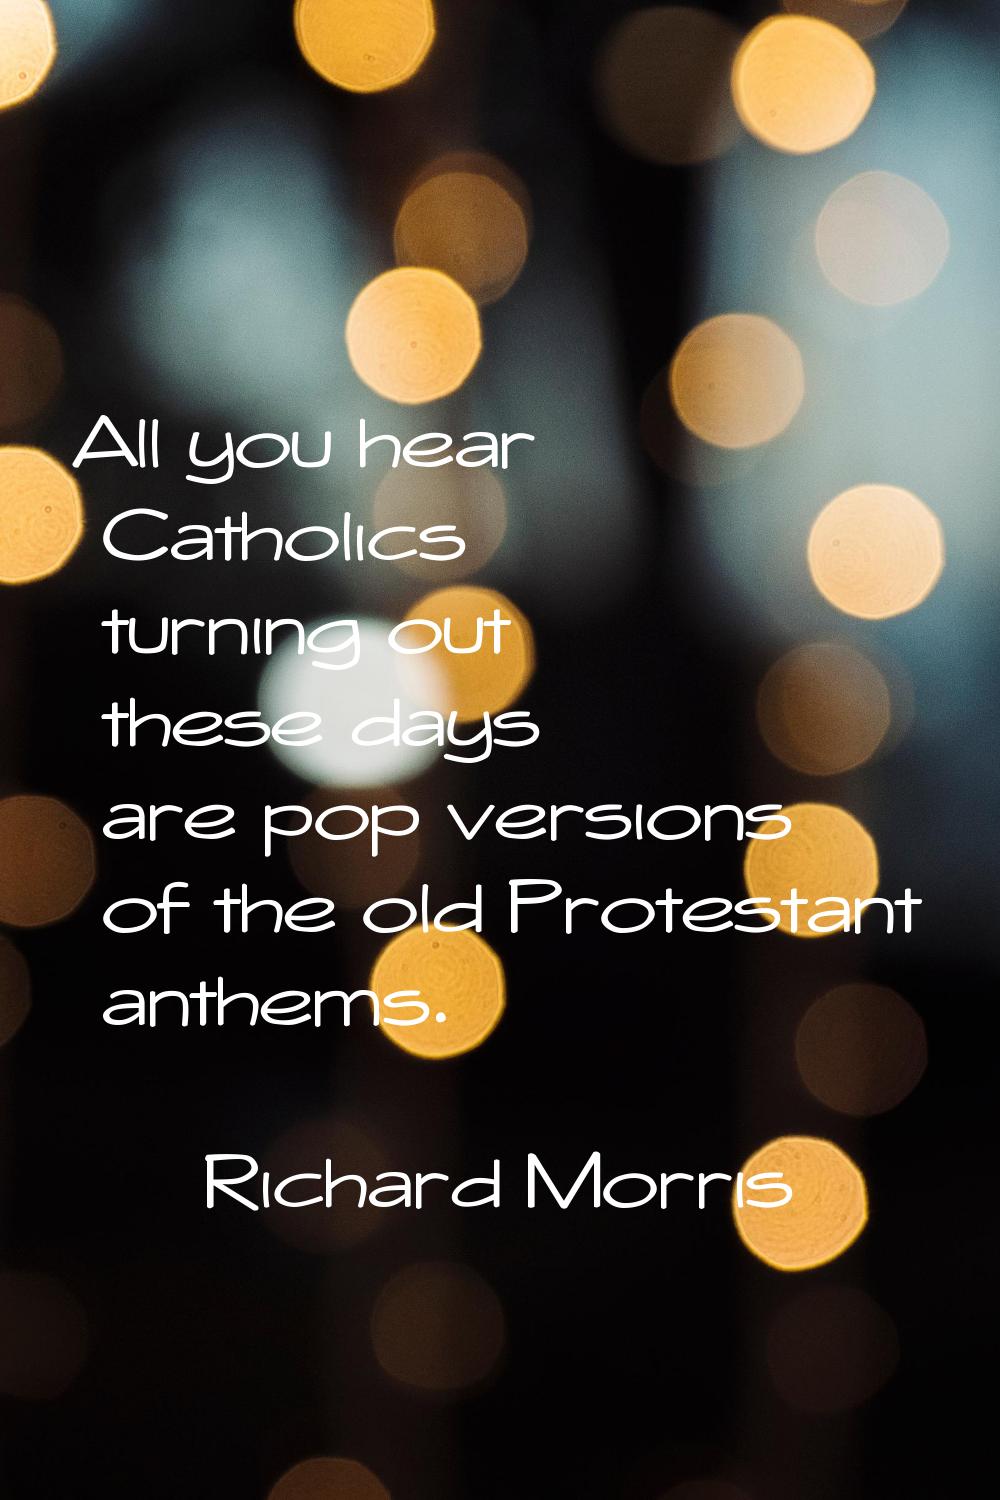 All you hear Catholics turning out these days are pop versions of the old Protestant anthems.